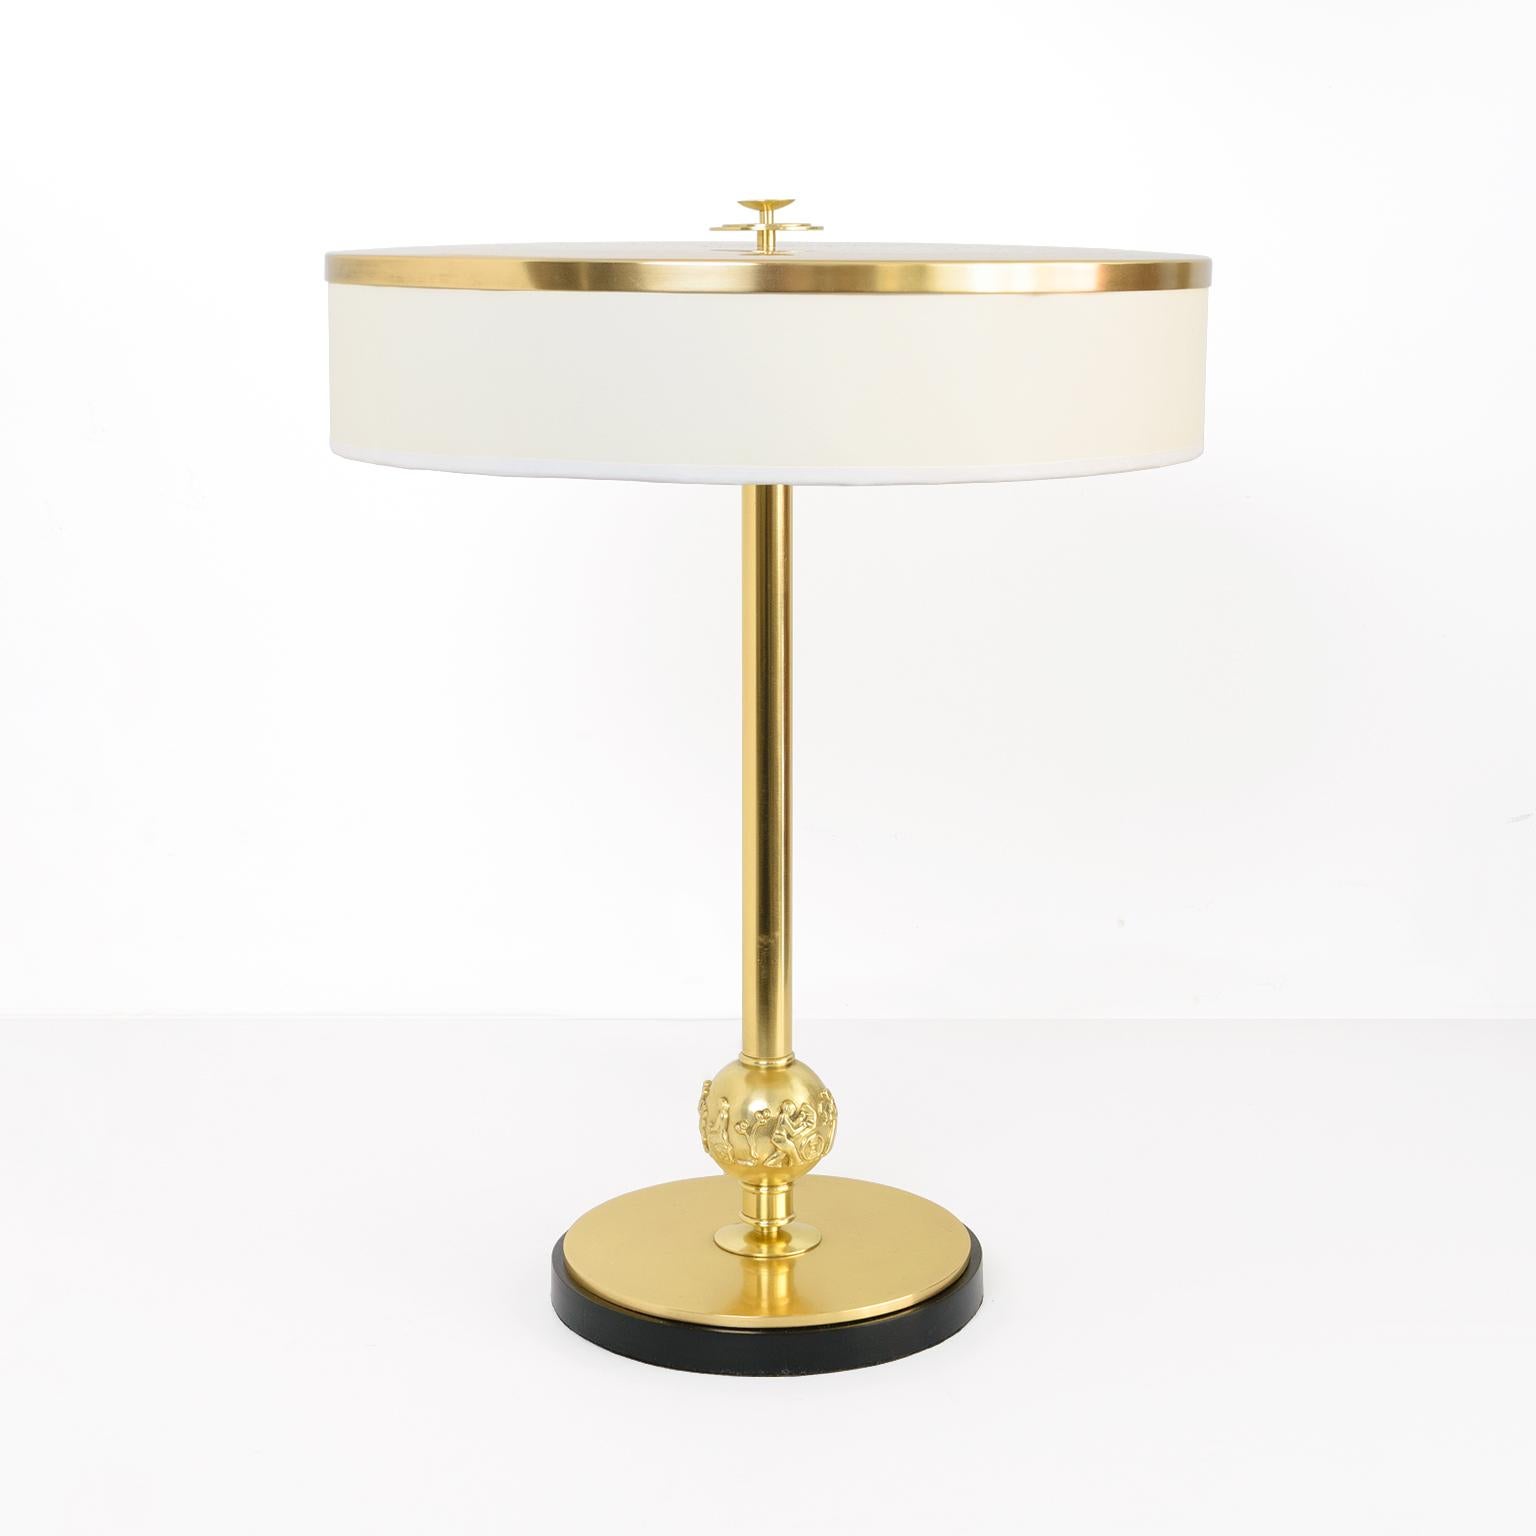 Herman Bergman signed, Swedish Art Deco (Swedish Grace) polished brass column lamp. The lamp has been newly re-polished and lacquered, re-wired with a 